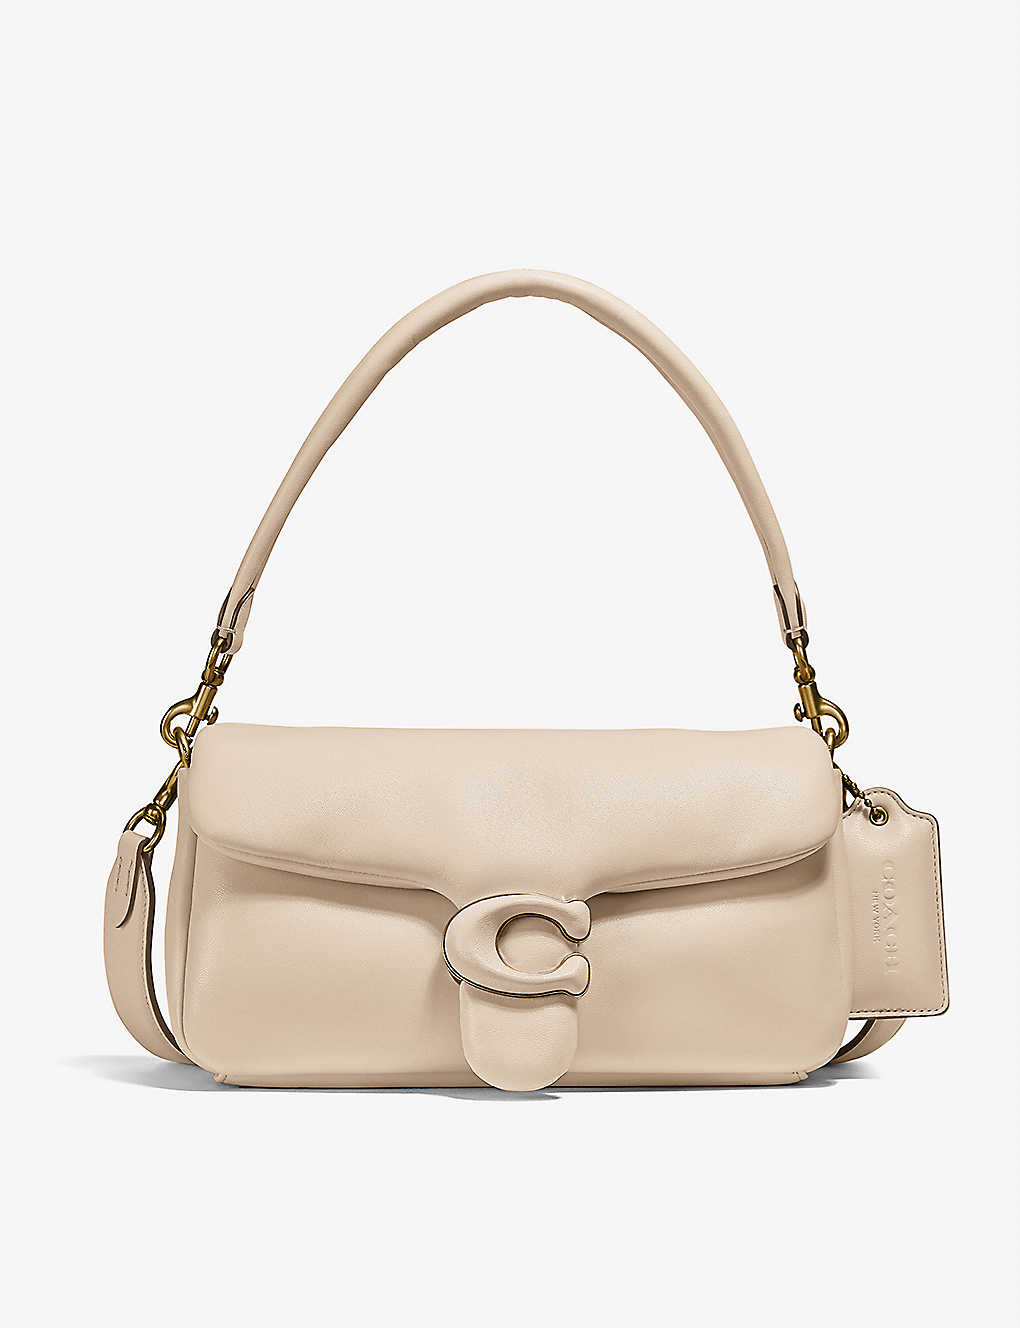 COACH Tabby Pillow leather shoulder bag